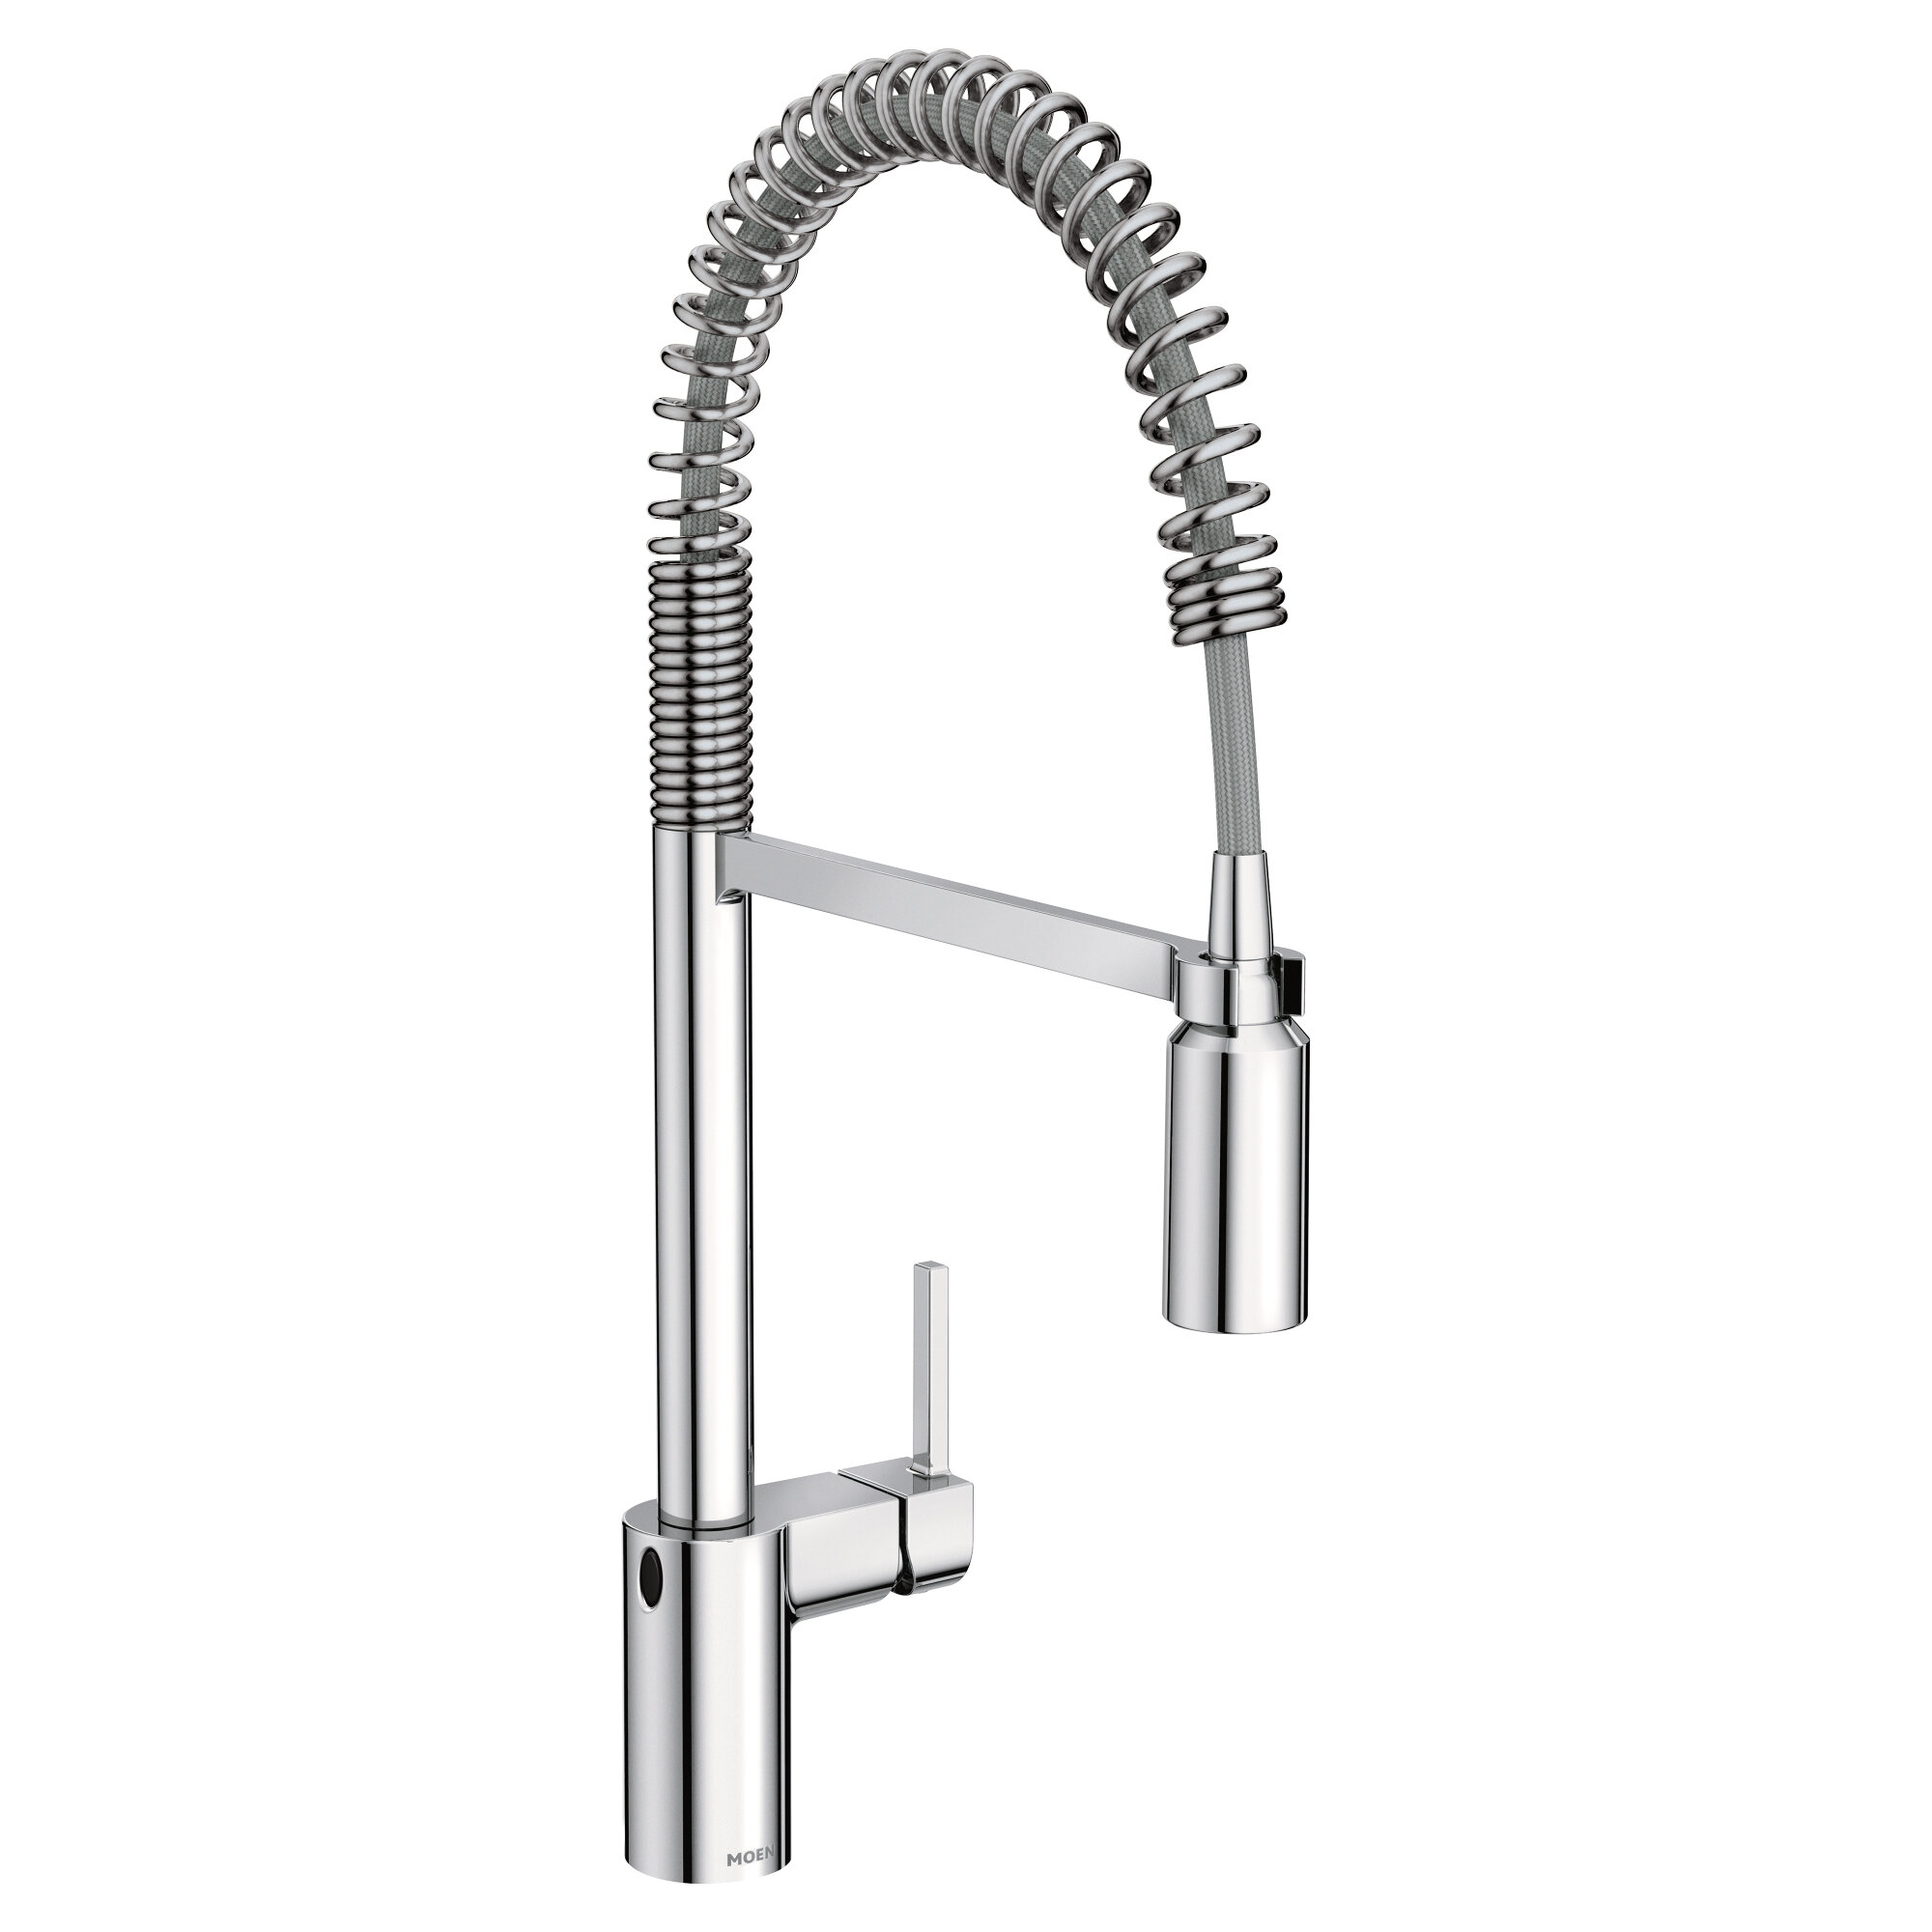 Moen Align Pull Down Touchless Single Handle Kitchen Faucet With Motionsense And Powerclean Technologies Reviews Wayfairca